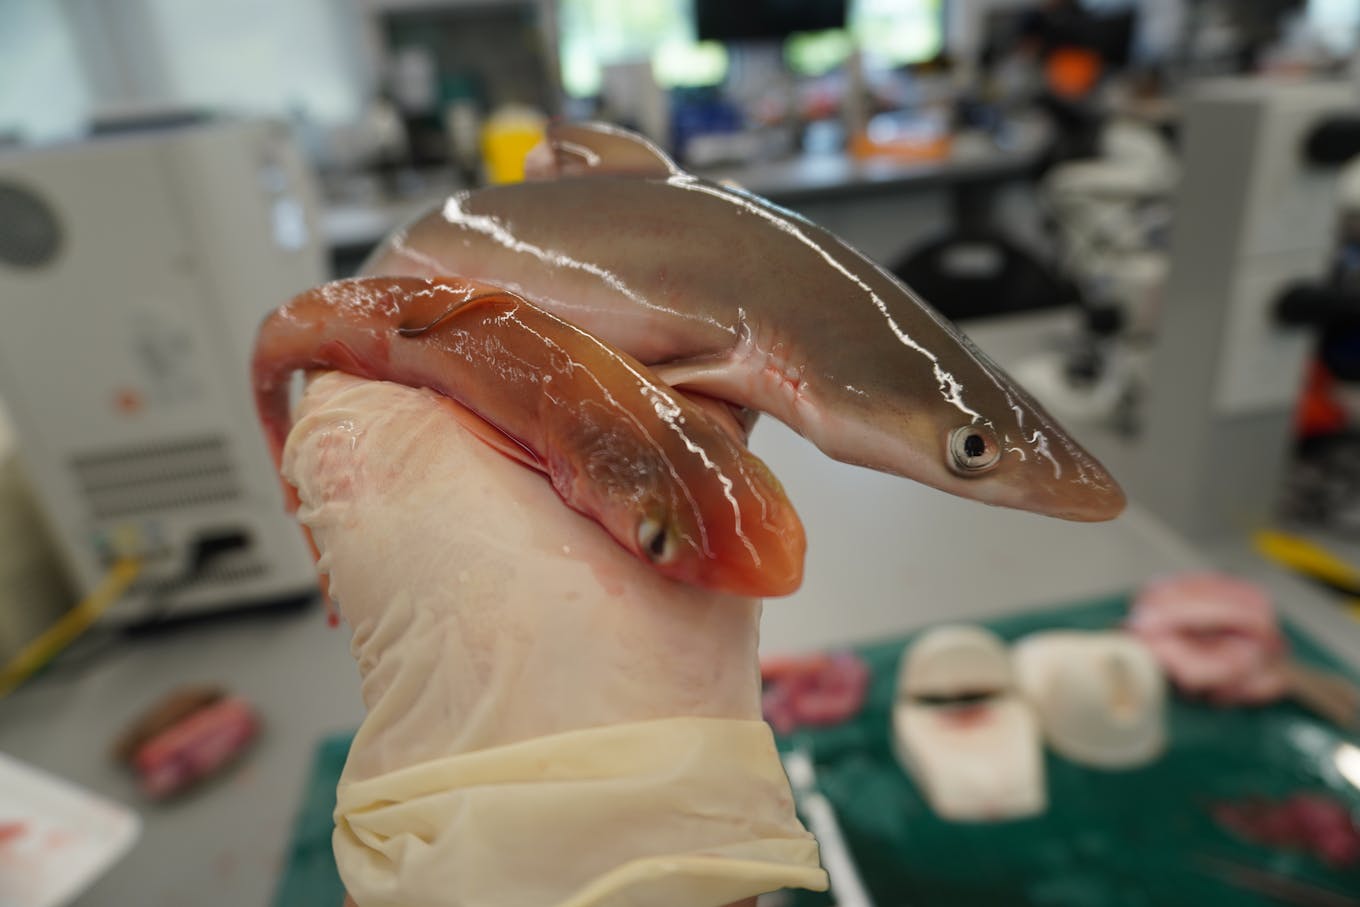 Baby blackspot sharks from two different mothers at different stages of development